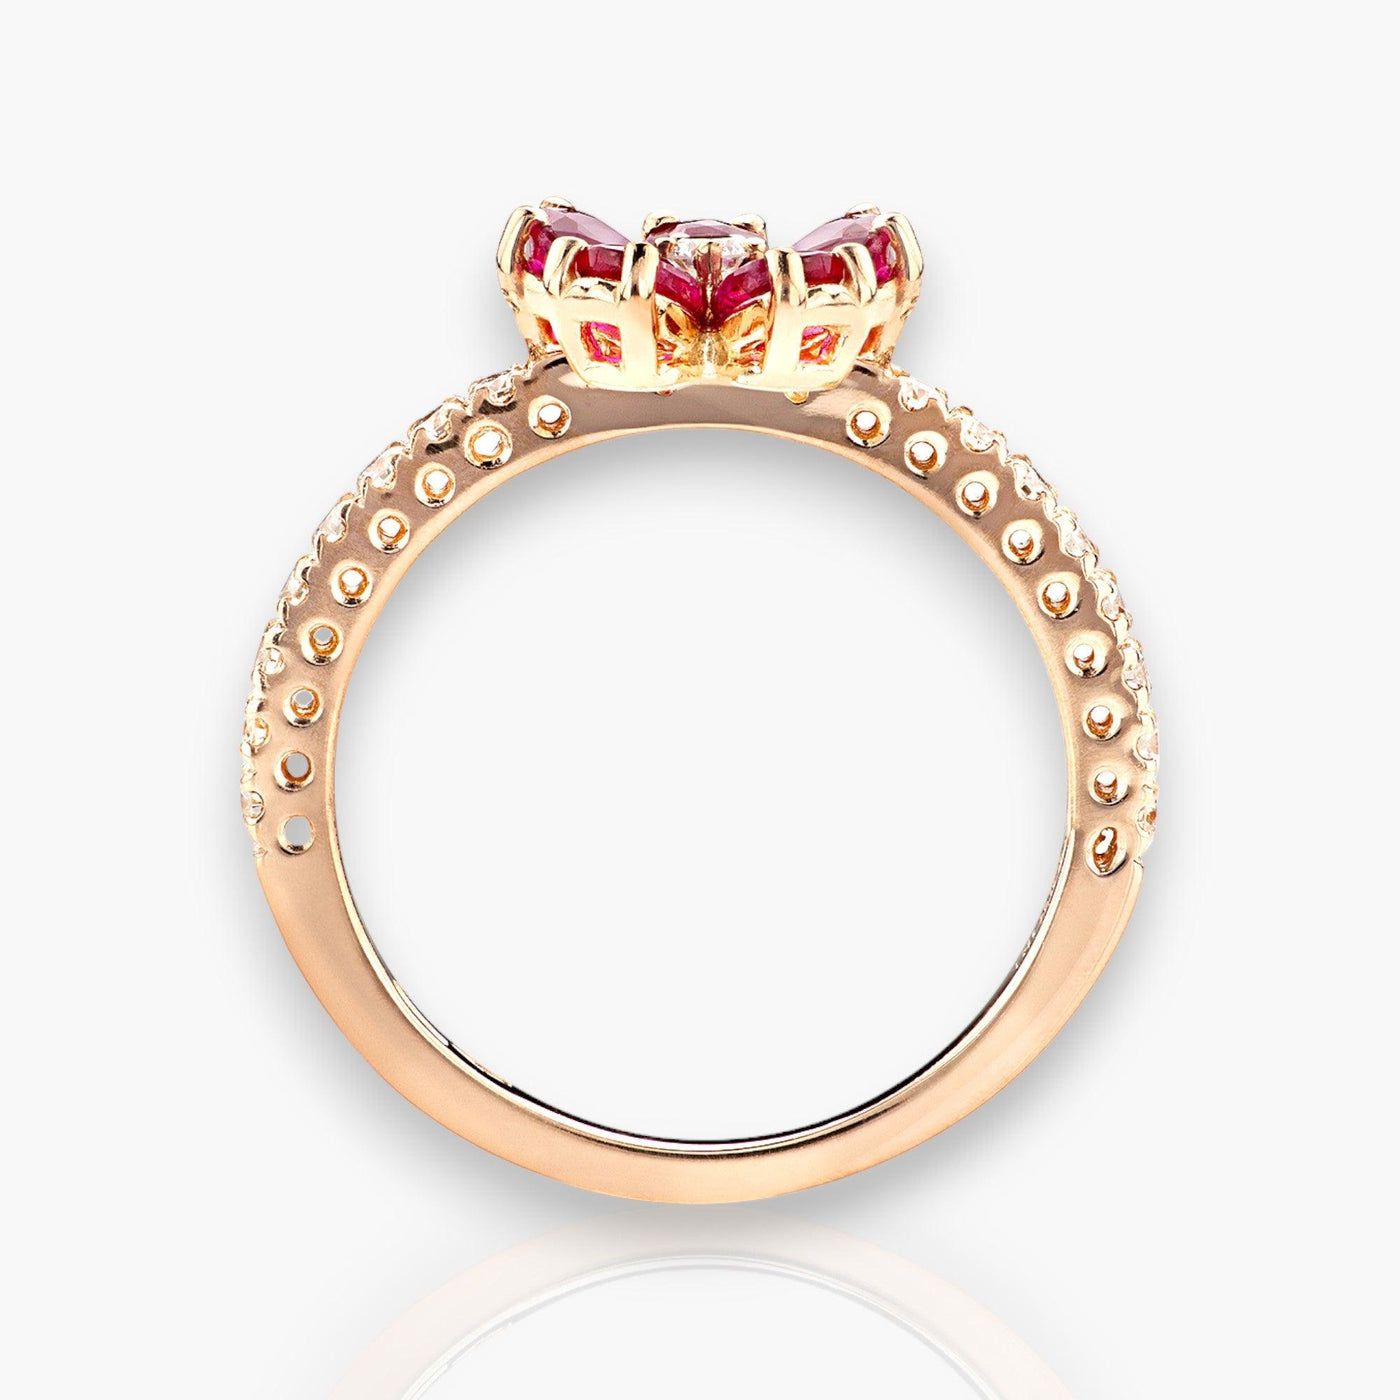 Ring "Cherry Blossom", Rose Gold, Diamonds And Rubies - Moregola Fine Jewelry